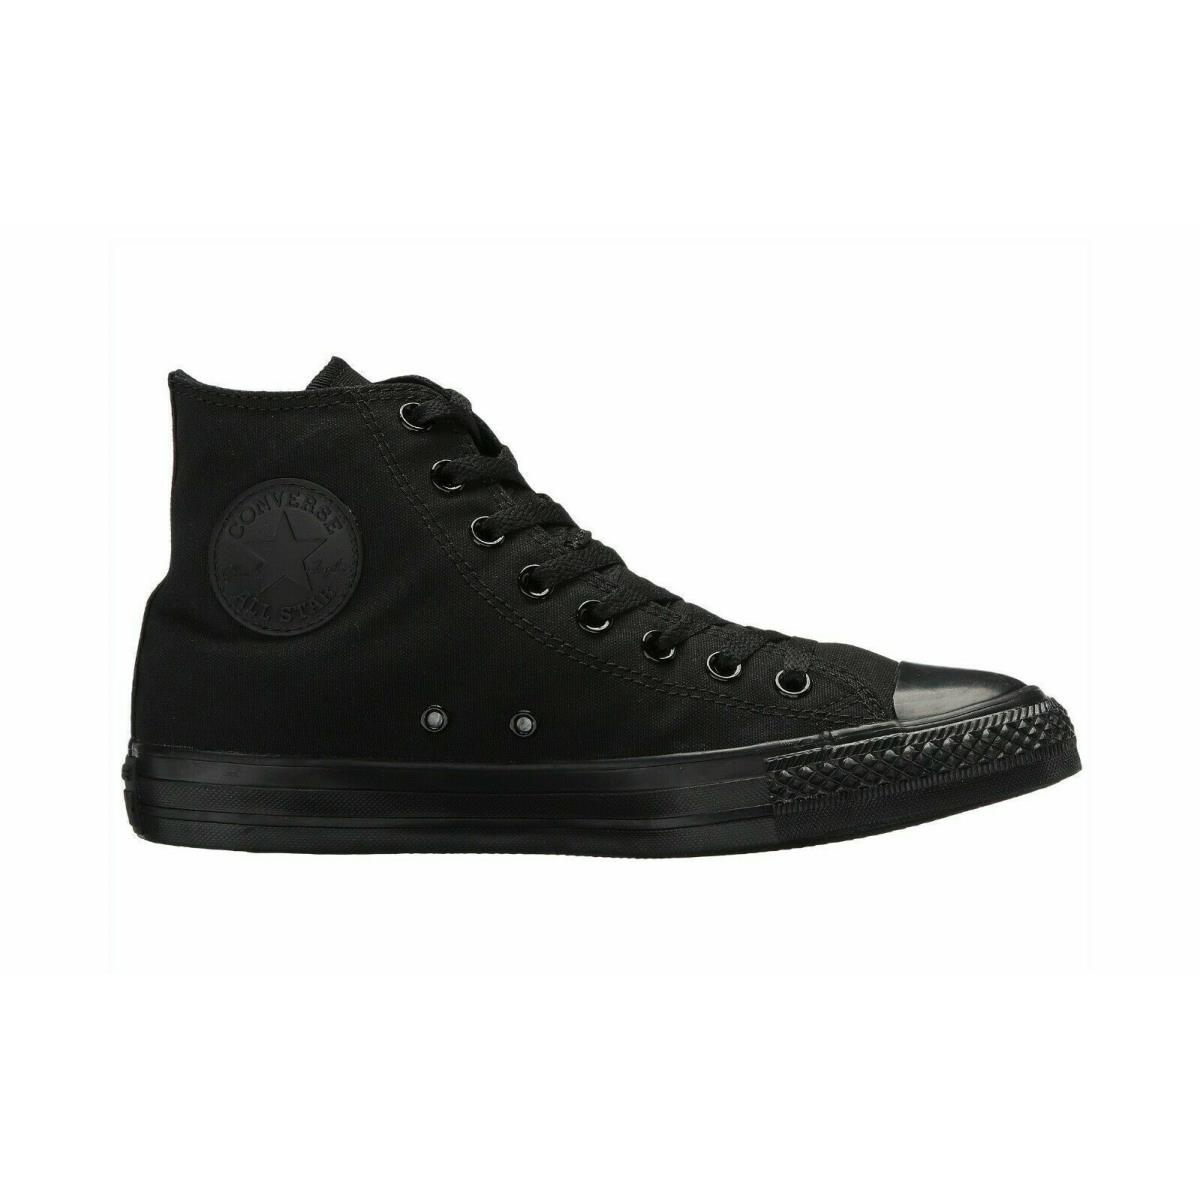 Converse All Star Chuck Taylor High Women Shoes Black Mono Canvas Sneakers